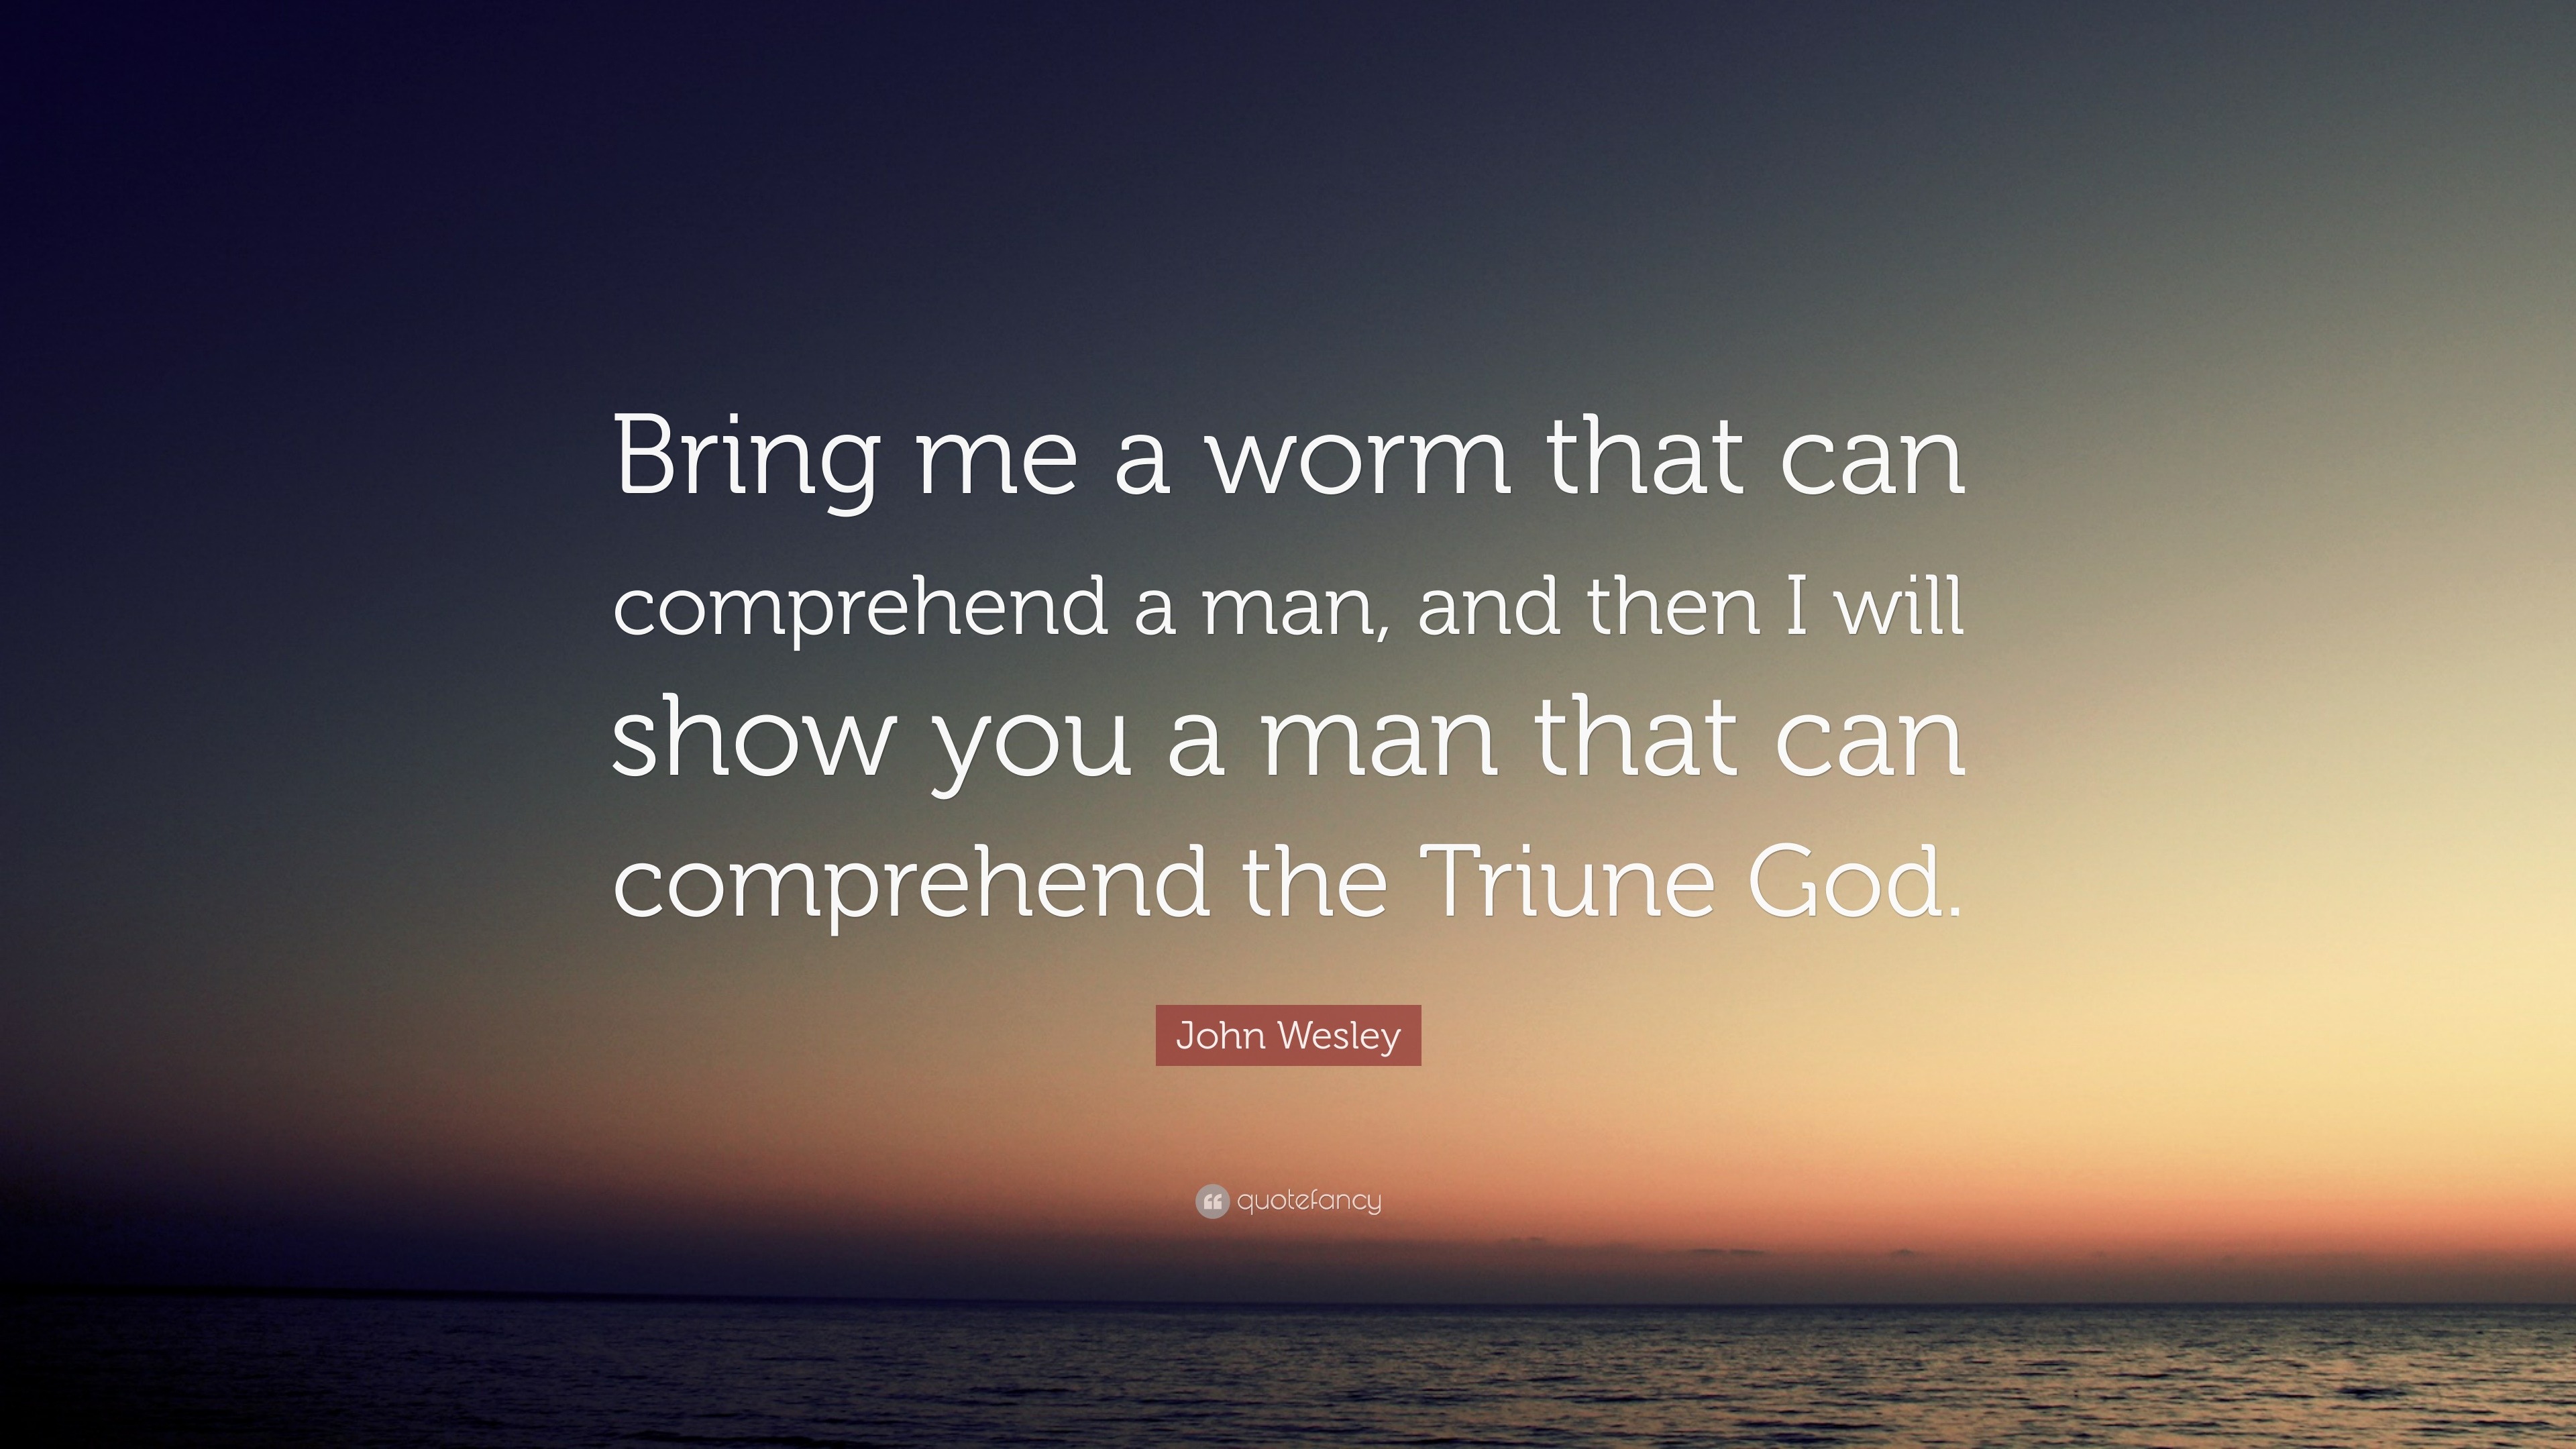 John Wesley Quote: “Bring me a worm that can comprehend a man, and then I  will